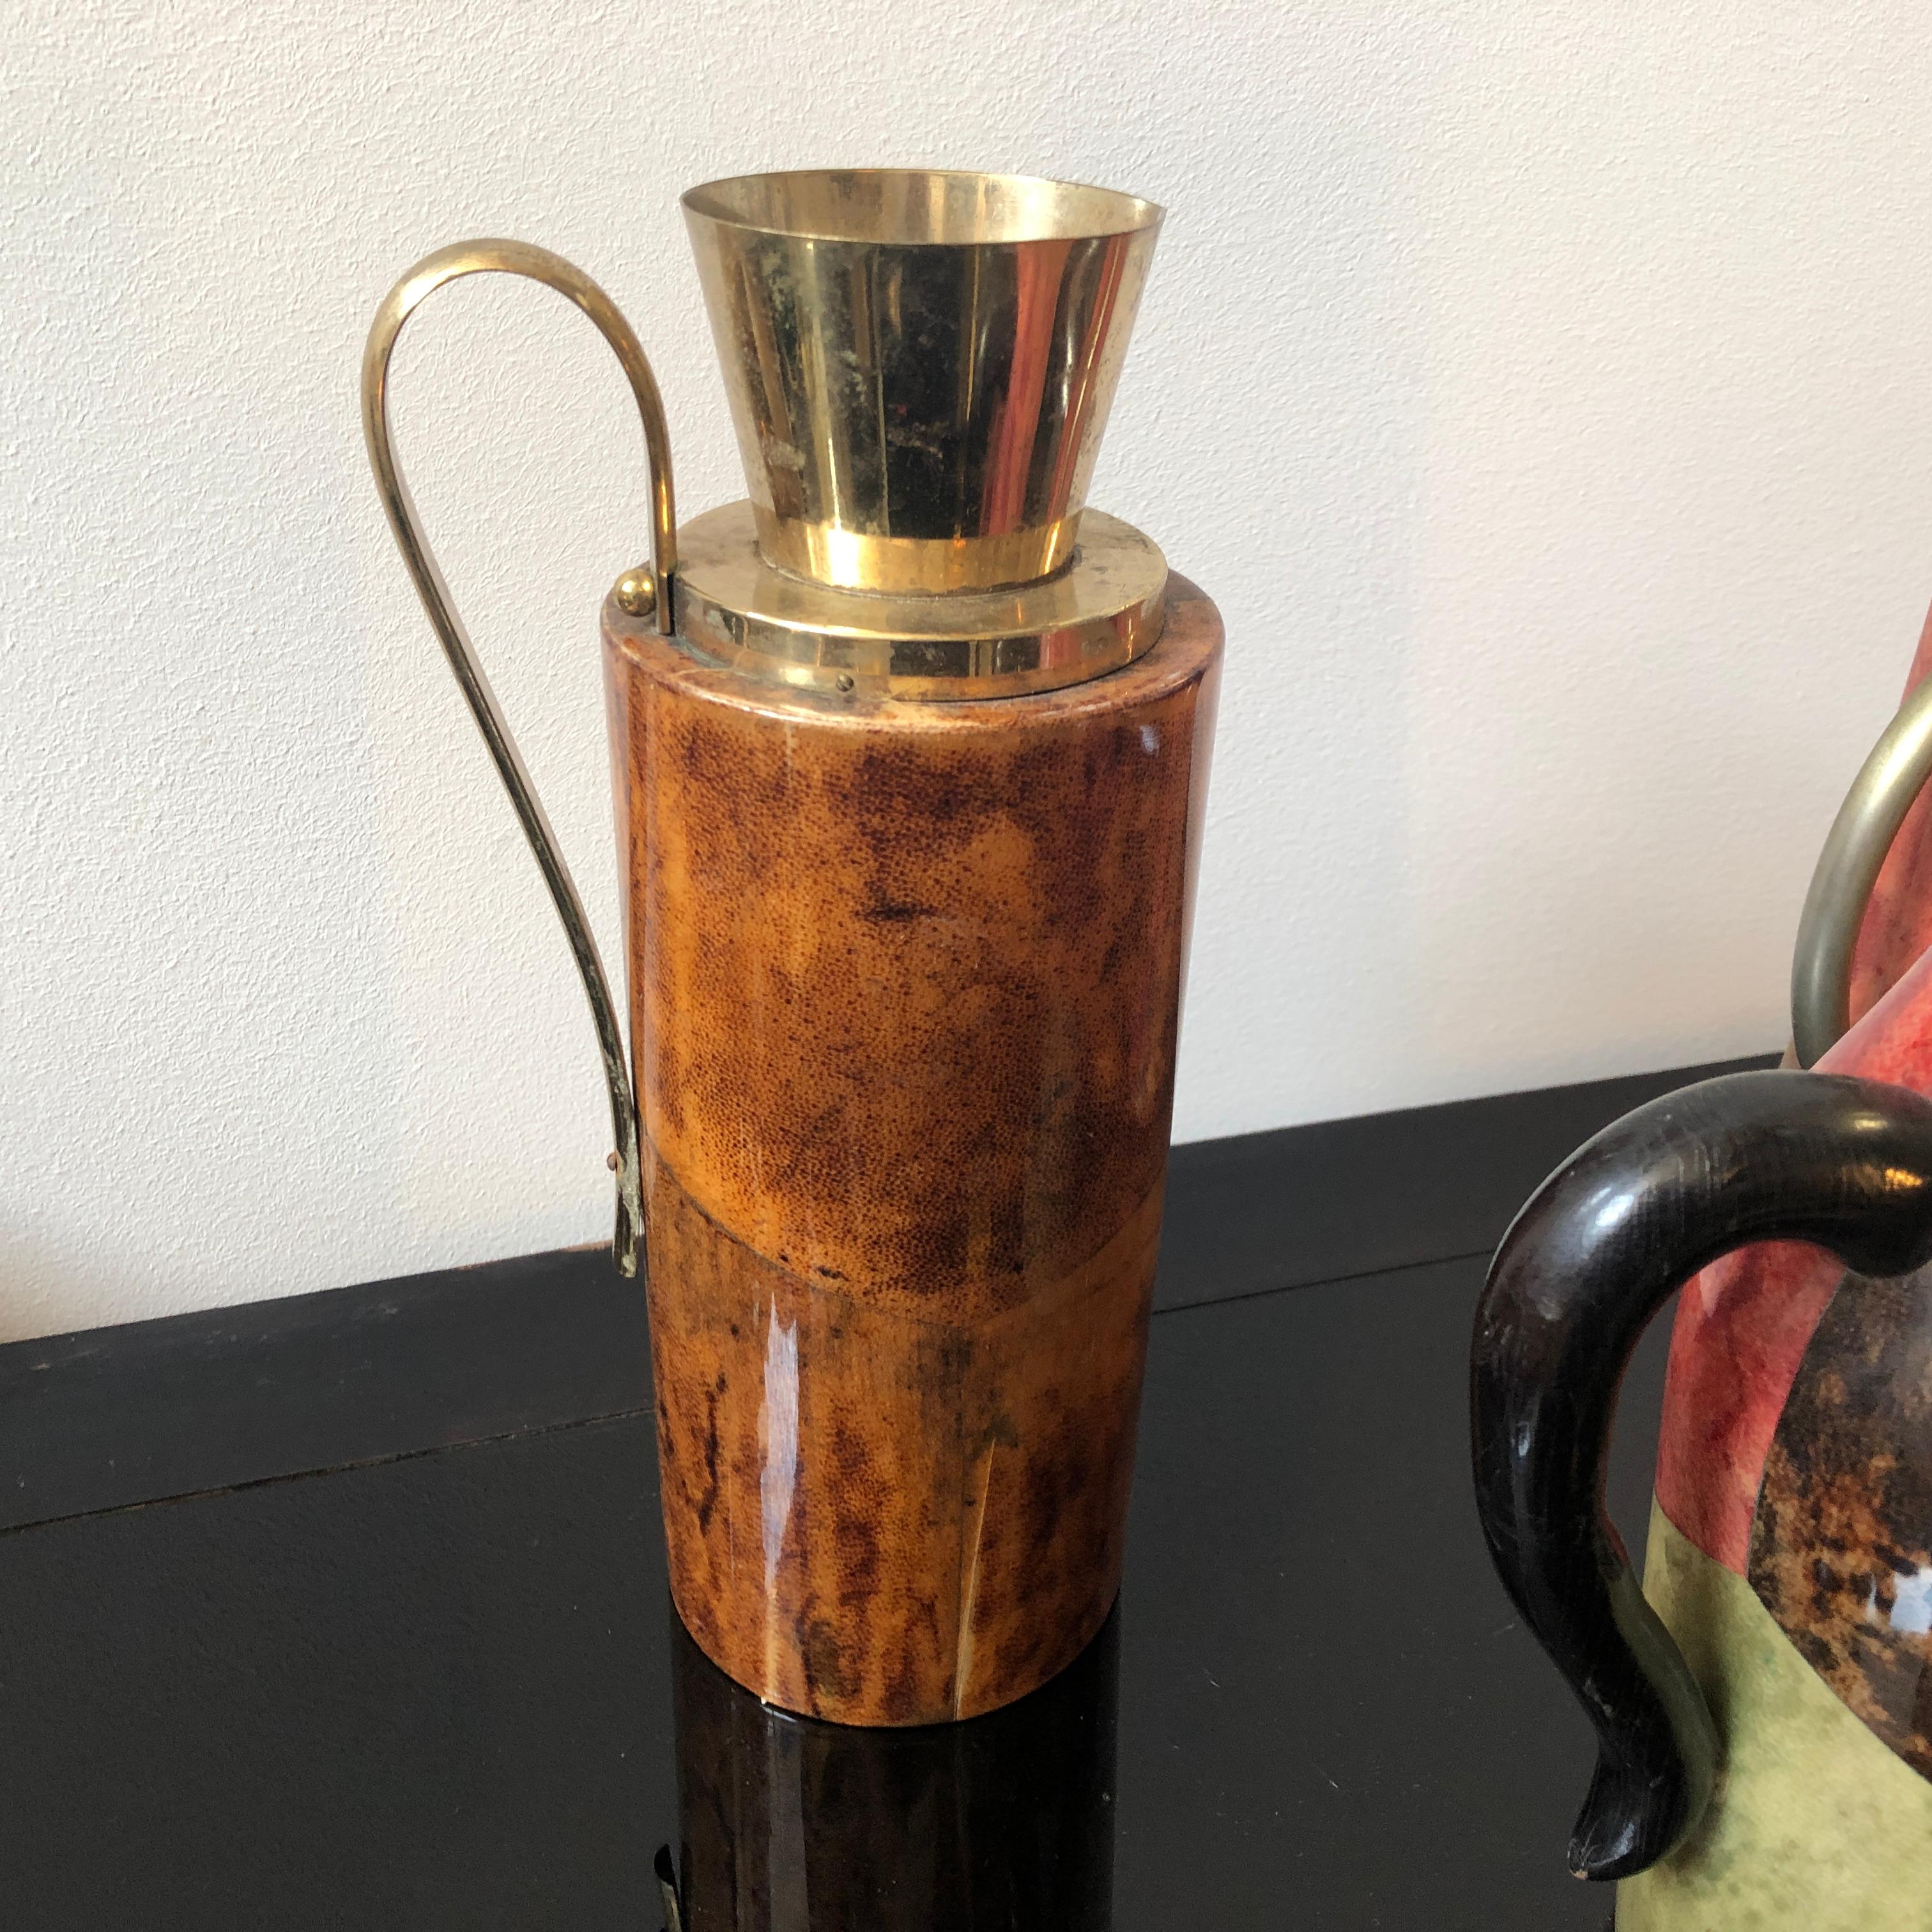 Three goatskin and brass Italian pitchers by Aldo Tura for Macabo, good conditions overall and original brass patina that create a vibrant vintage look.